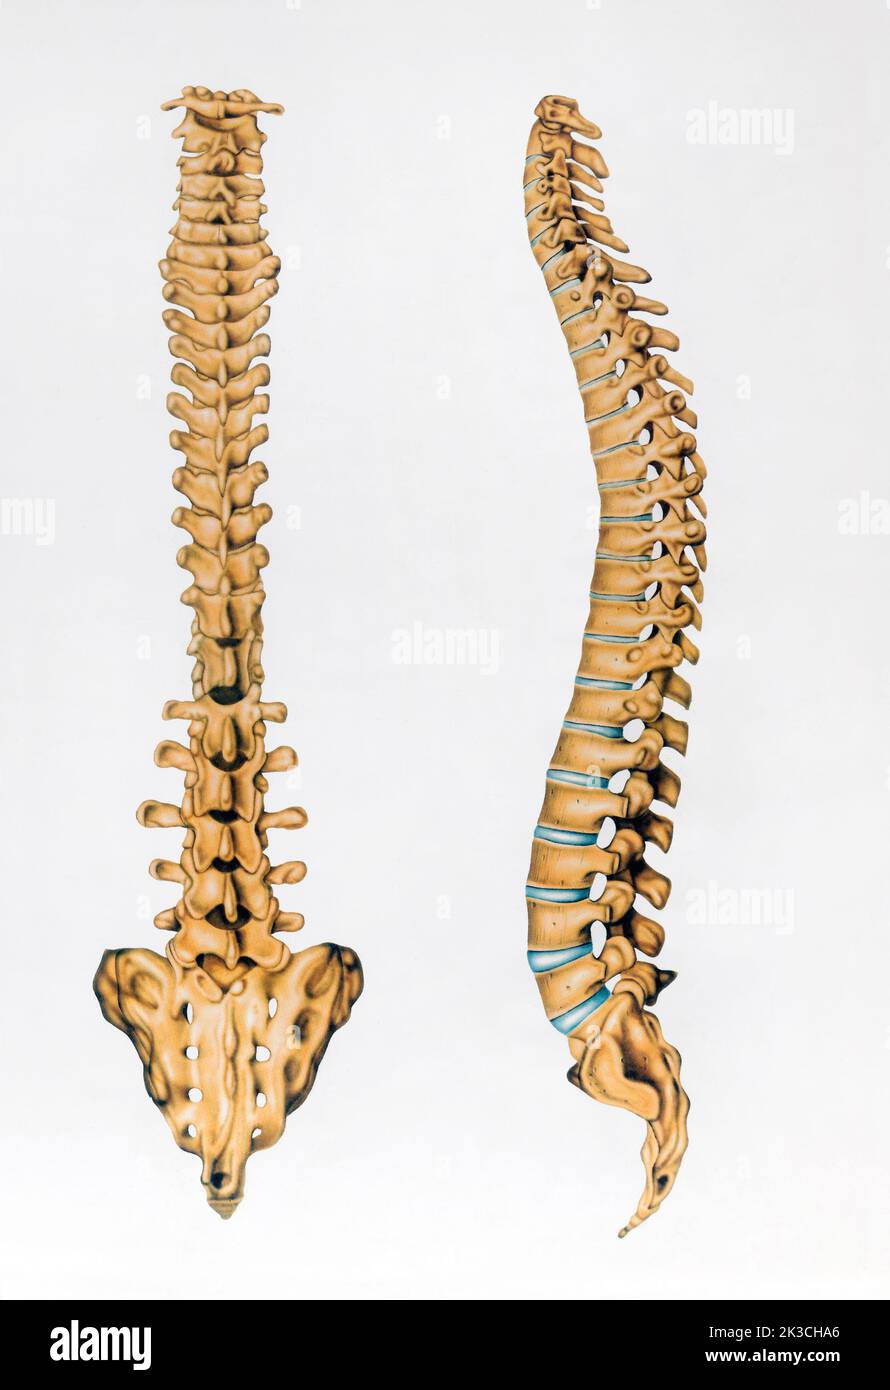 Retro schematic image of healthy bones of human spine depicted of gray background Stock Photo